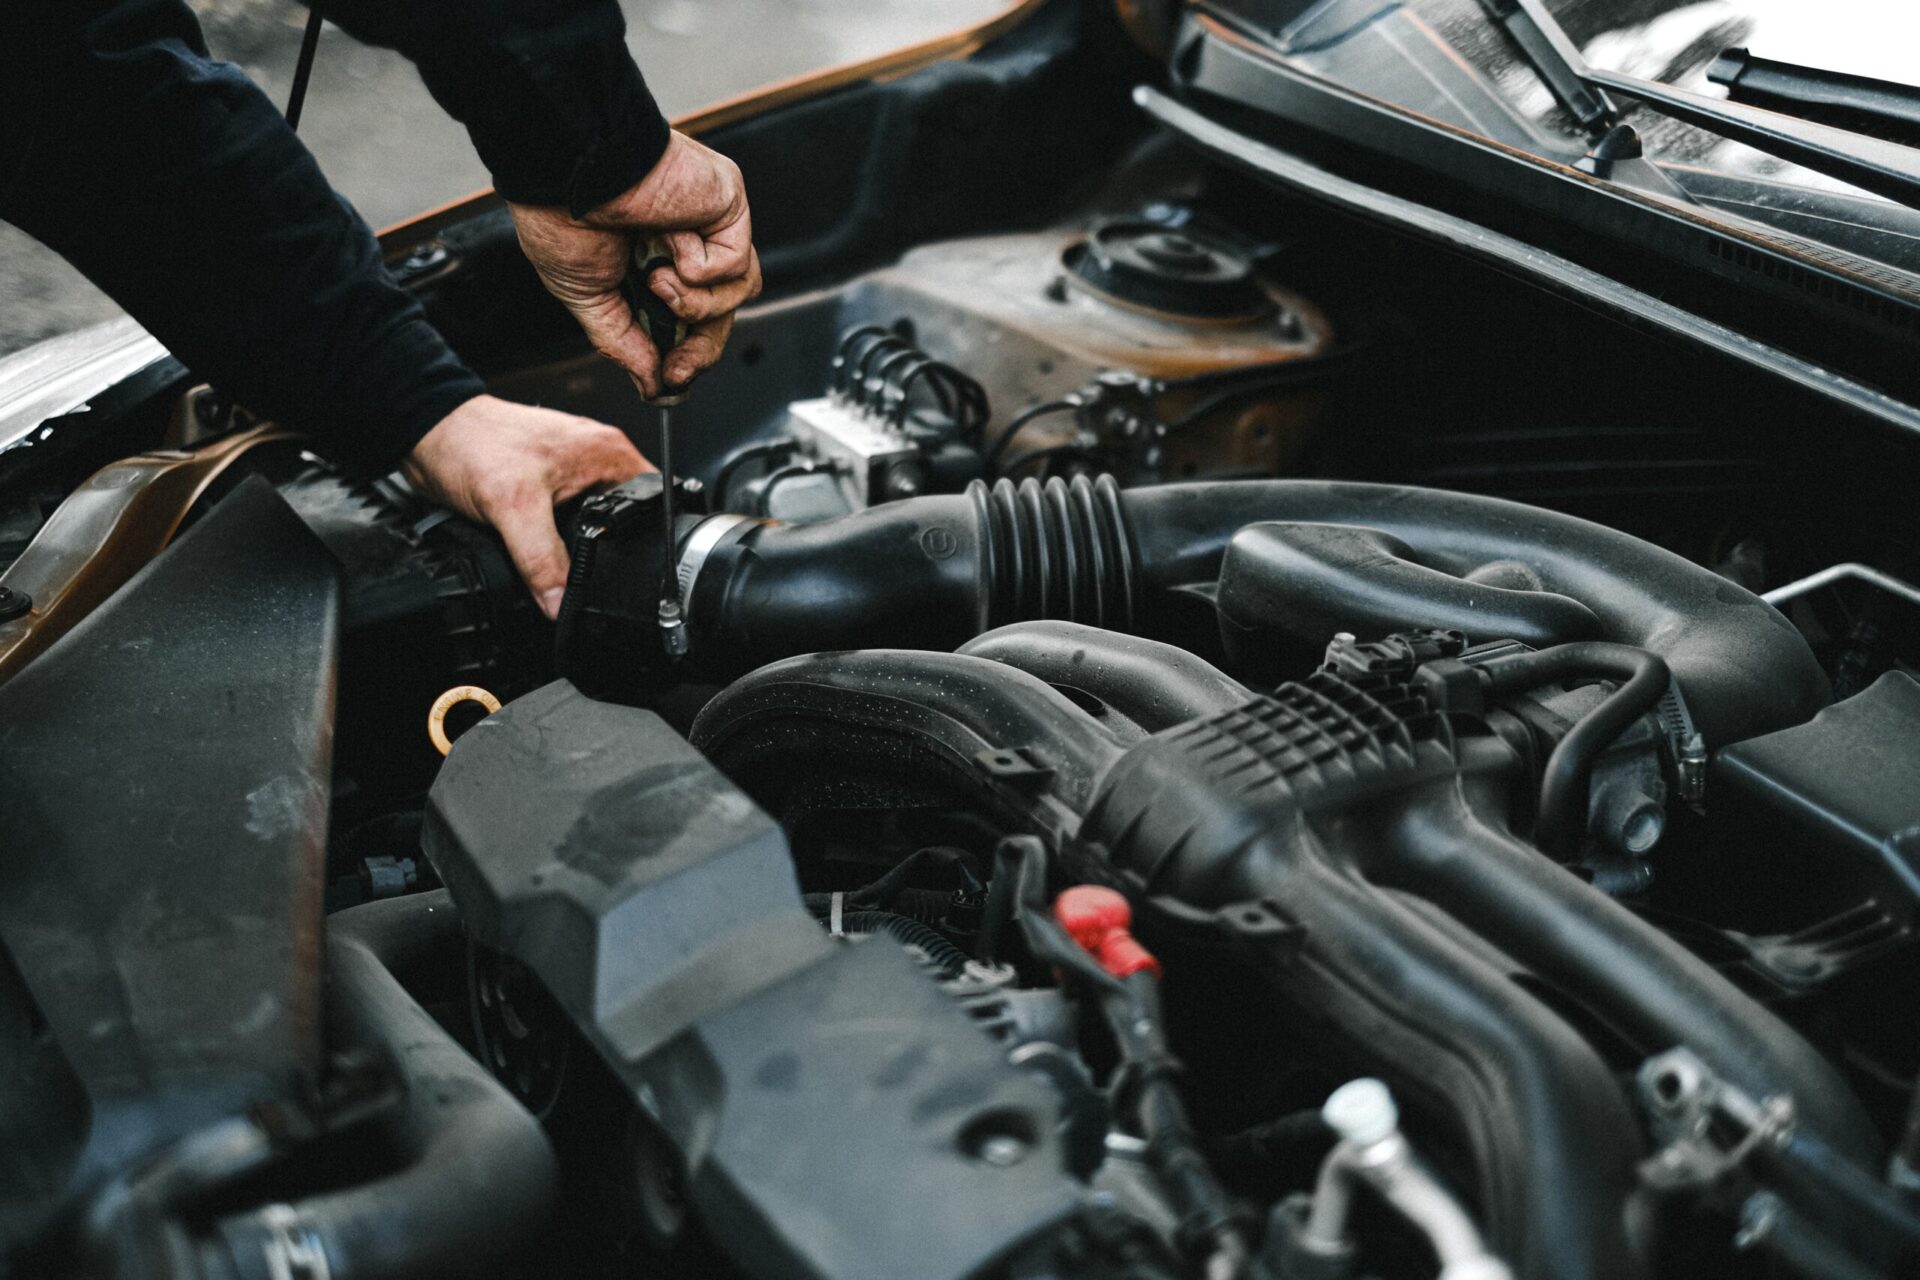 Hands Reaching Into the Engine Bay of a Car